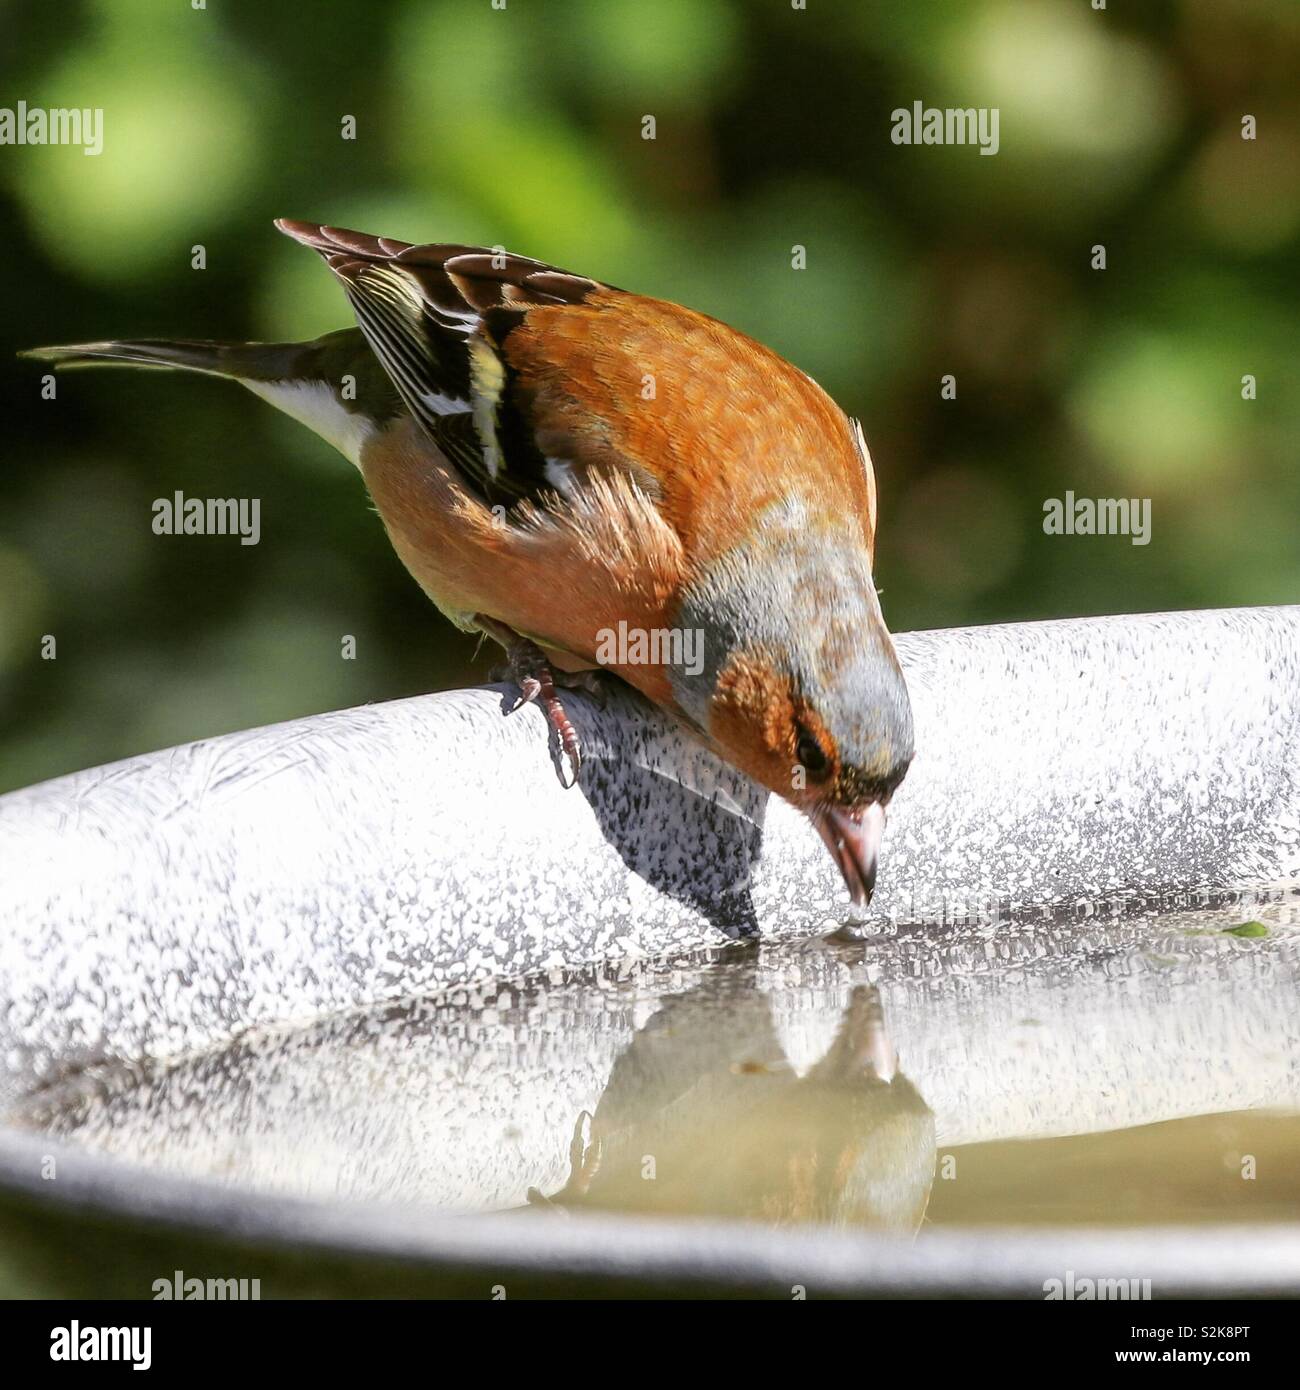 Chaffinch taking a drink Stock Photo